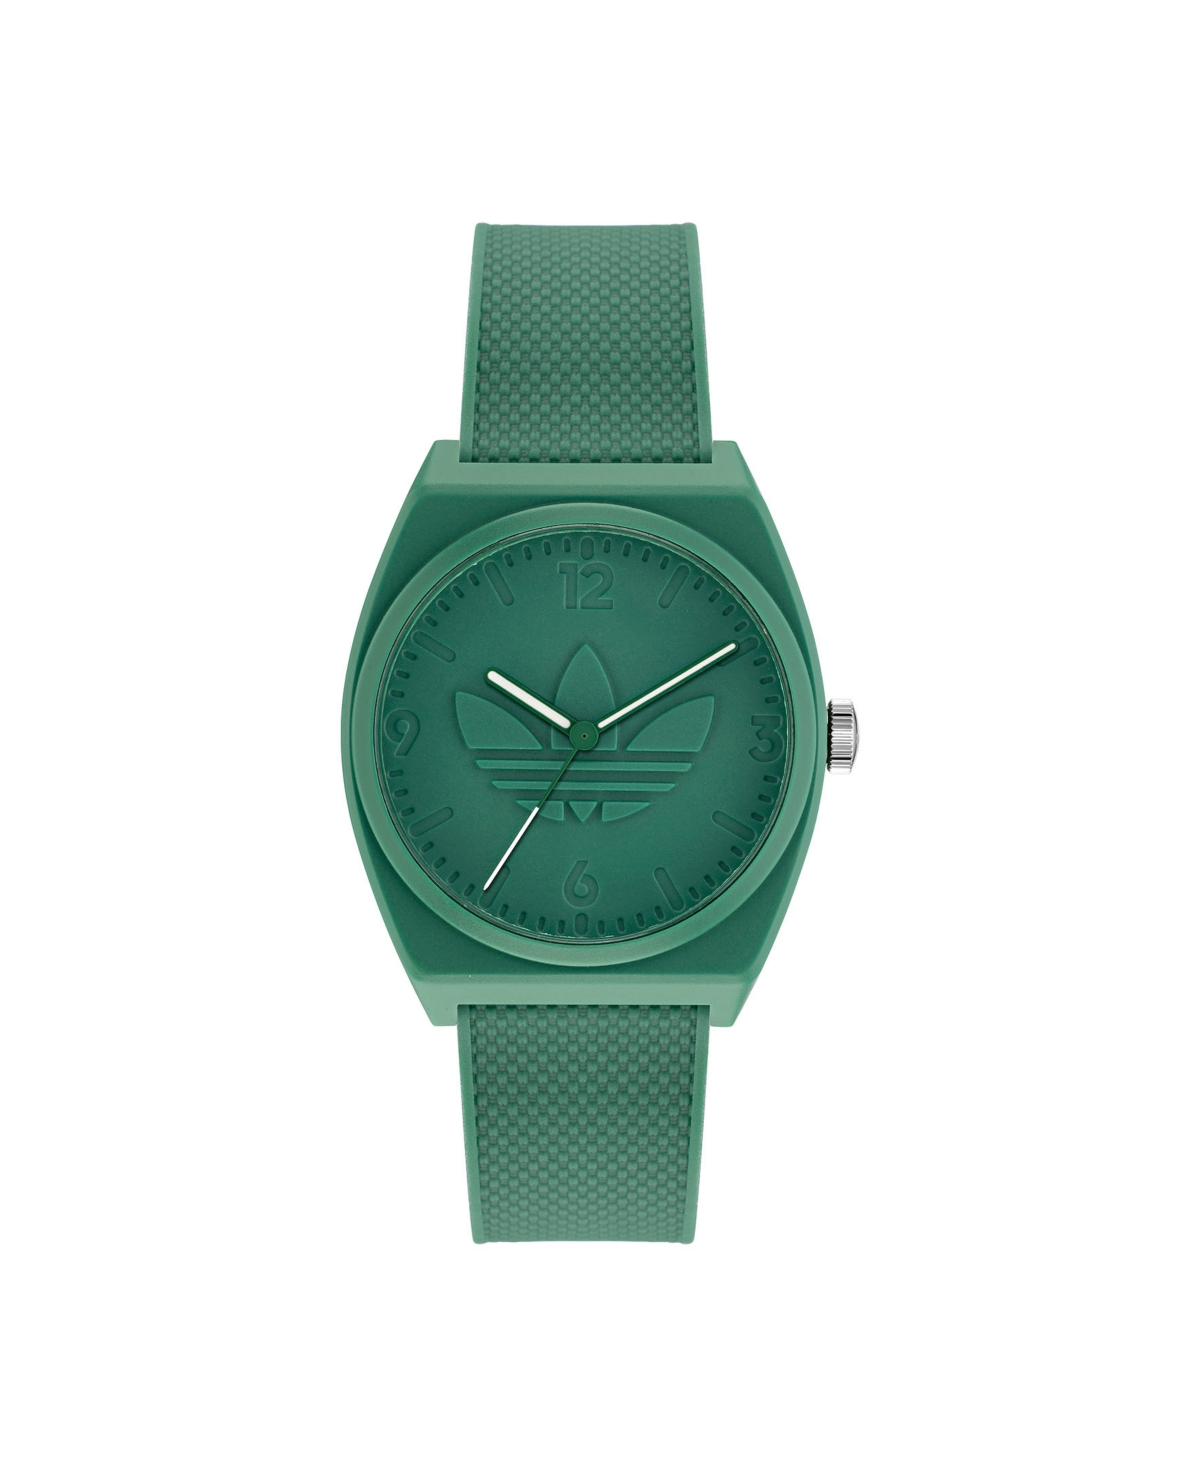 Unisex Three Hand Project Two Green Resin Strap Watch 38mm - Green